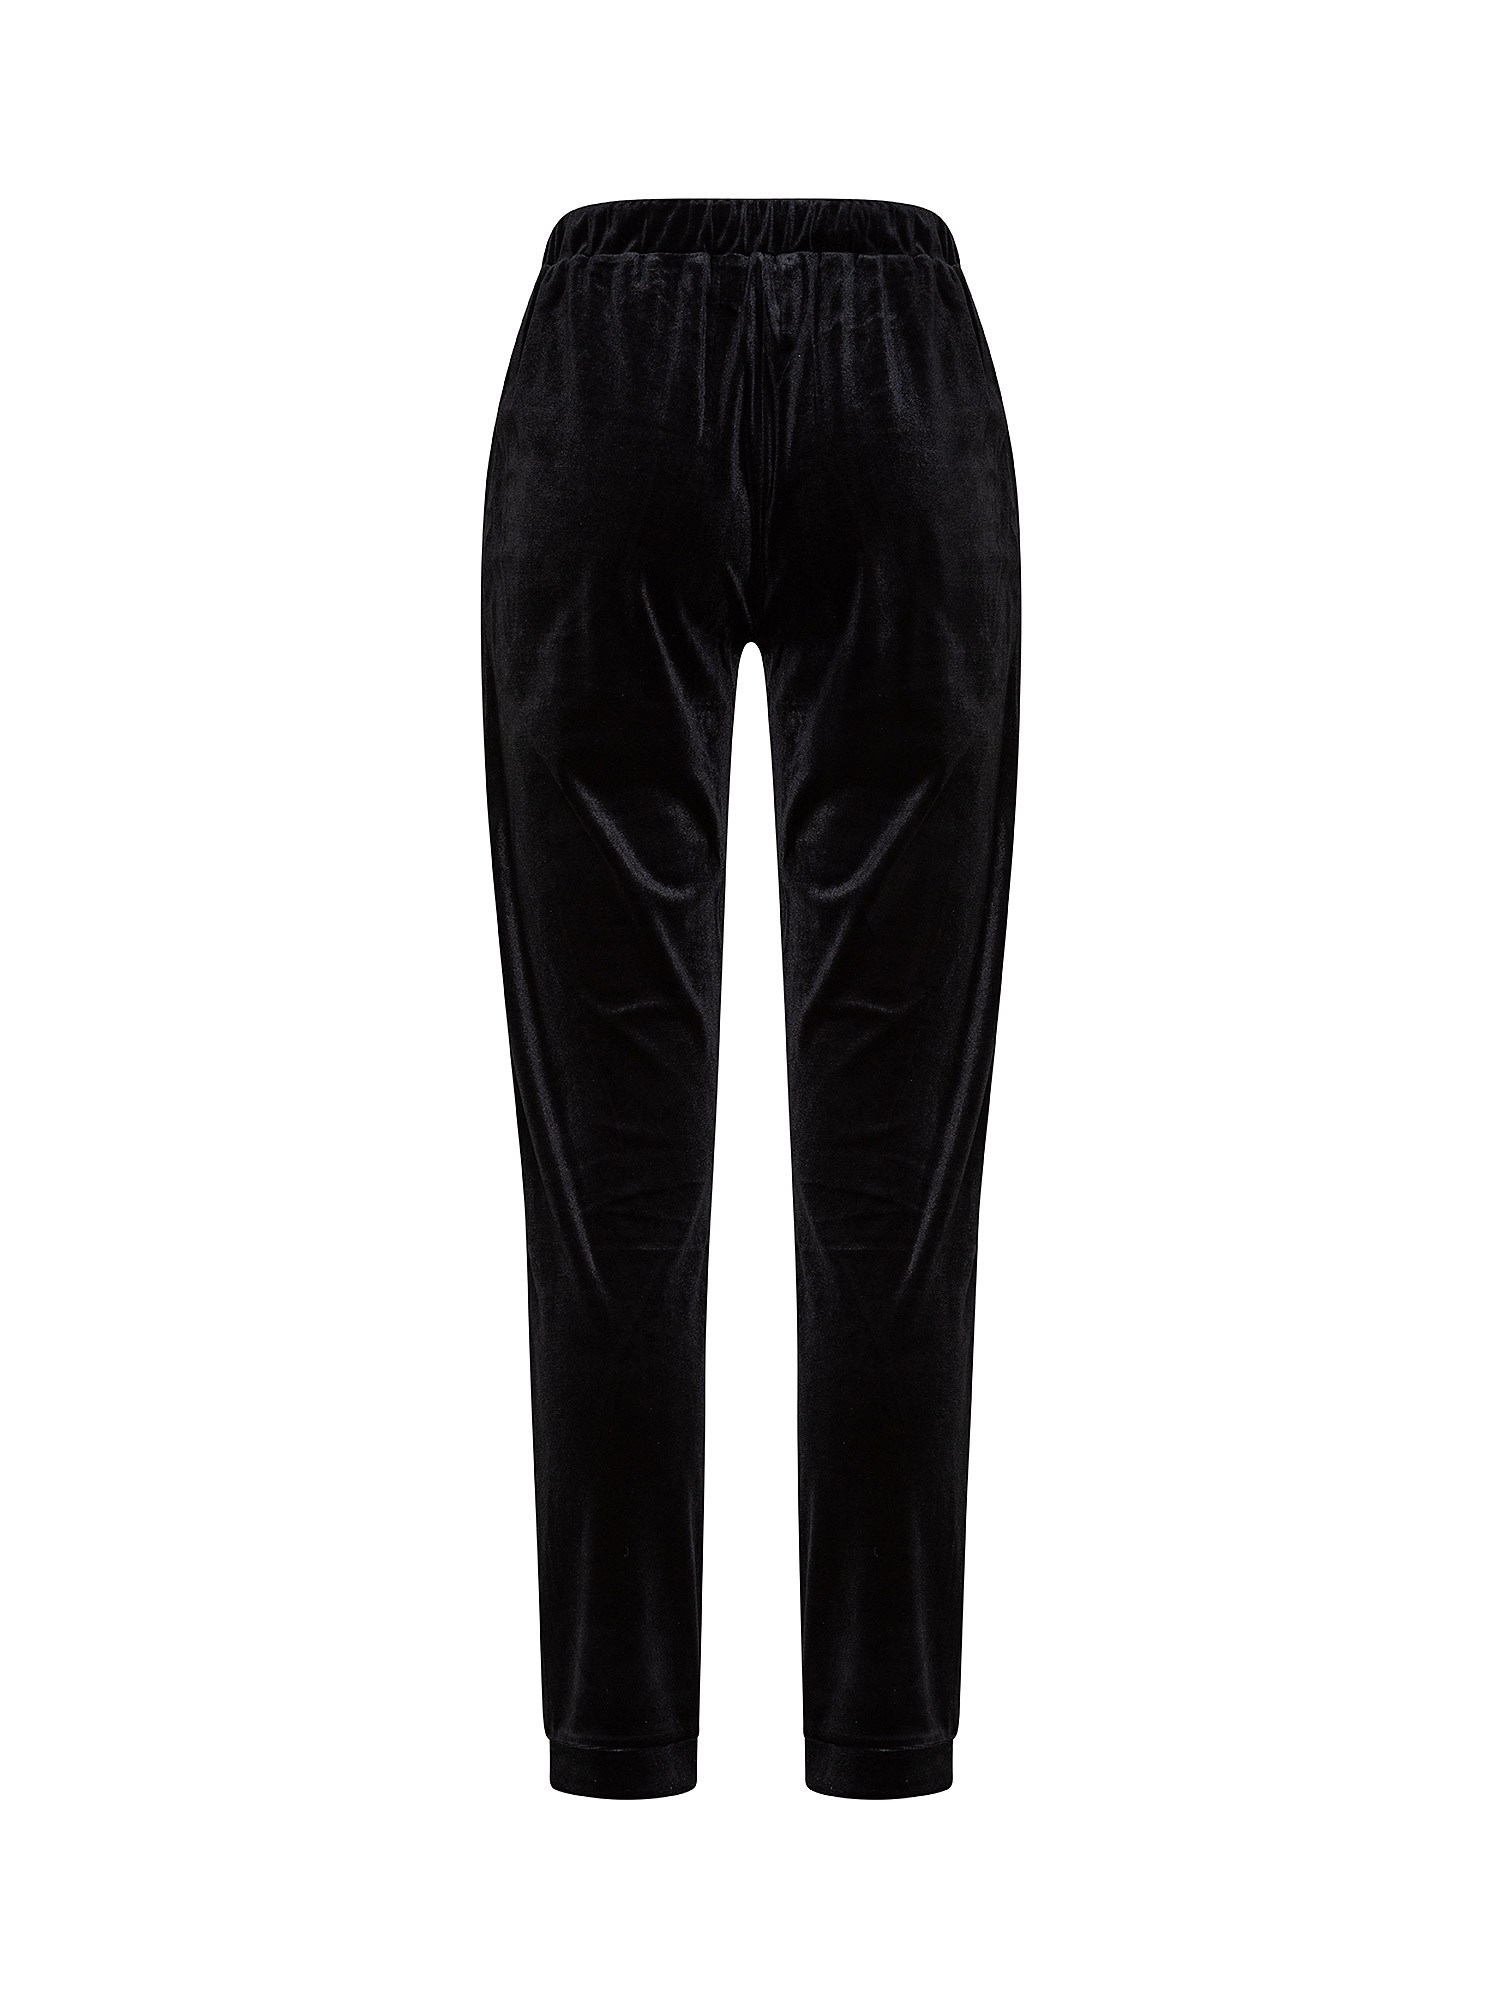 chenille trousers, Black, large image number 1